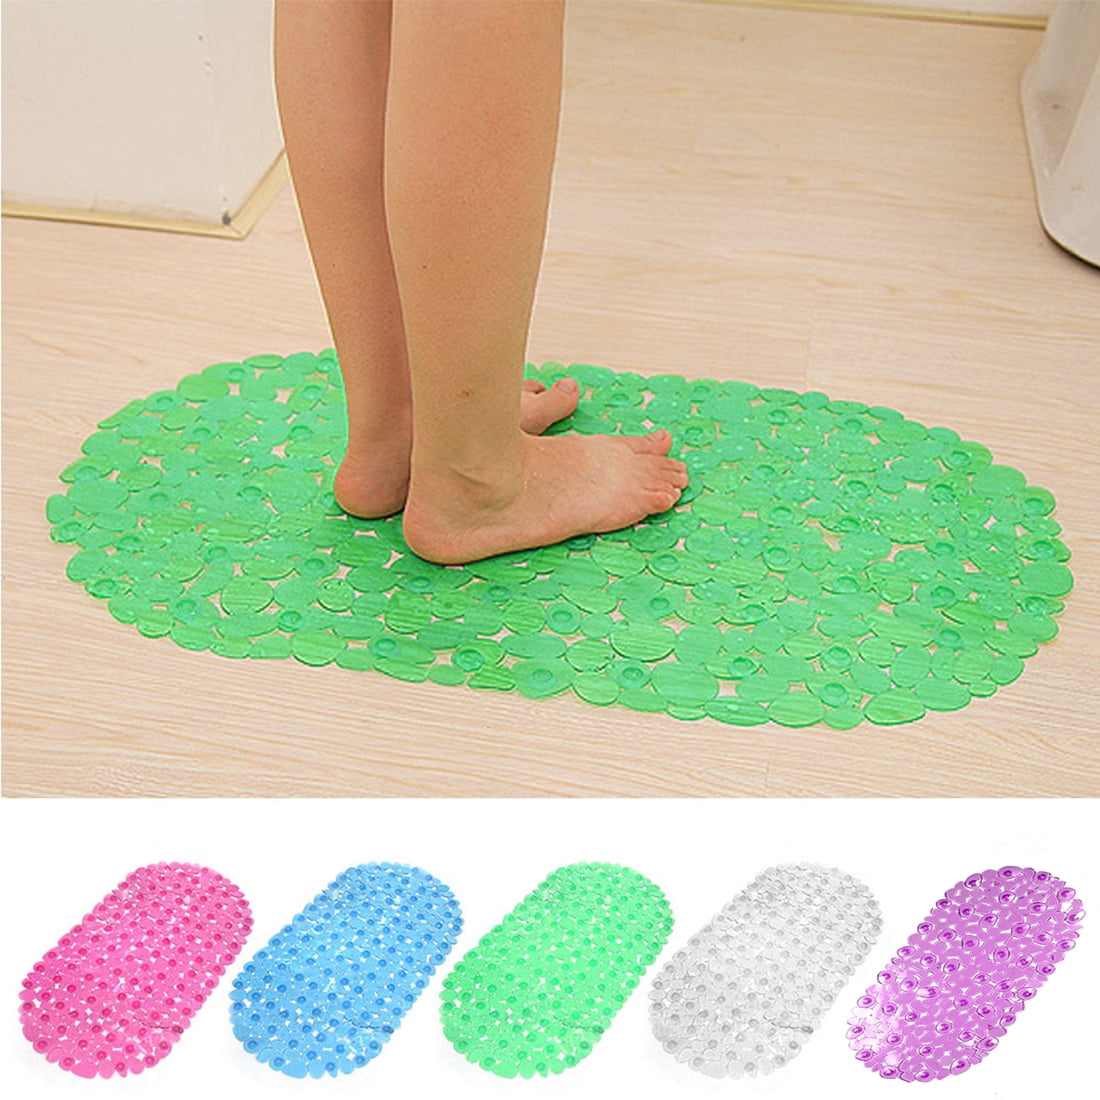 Strong Anti Non Slip Shower Safety Rubber Suction Cup Bathroom Bath Mat 